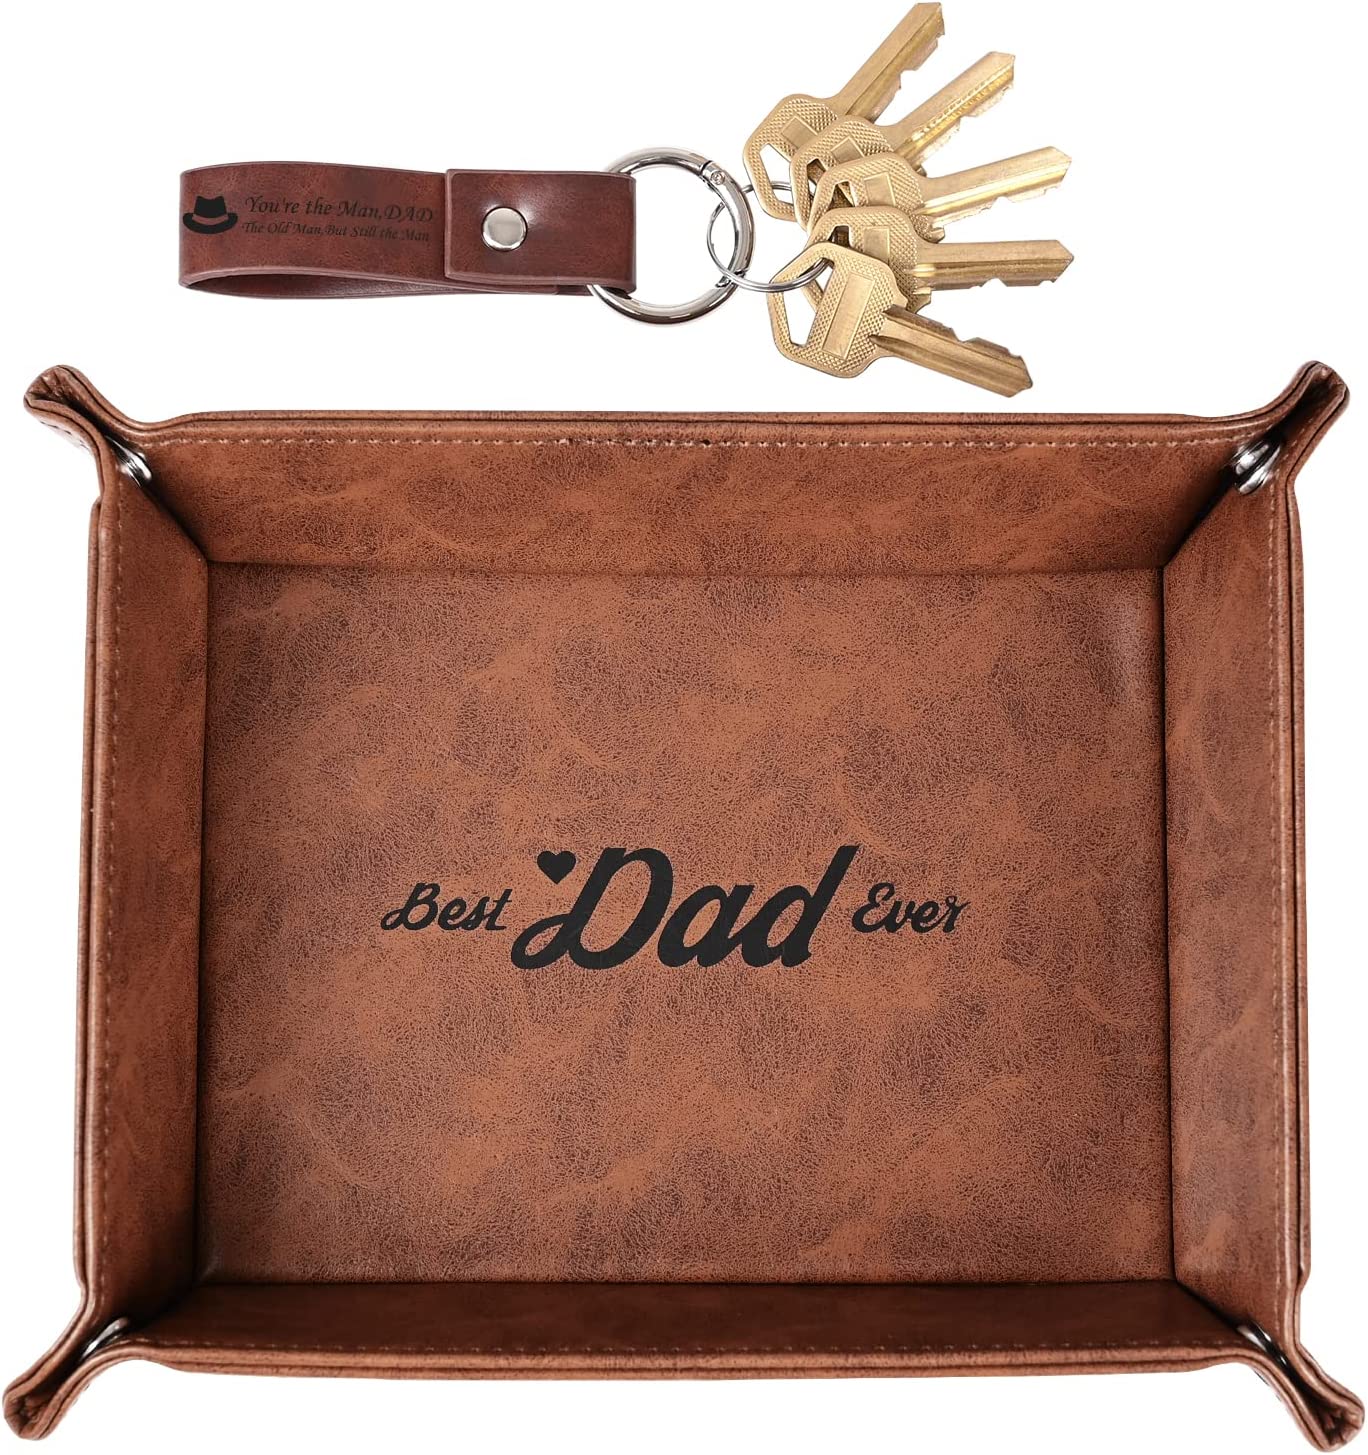 11 Must-Have Easter Gifts Ideas for Dad That He'll Love